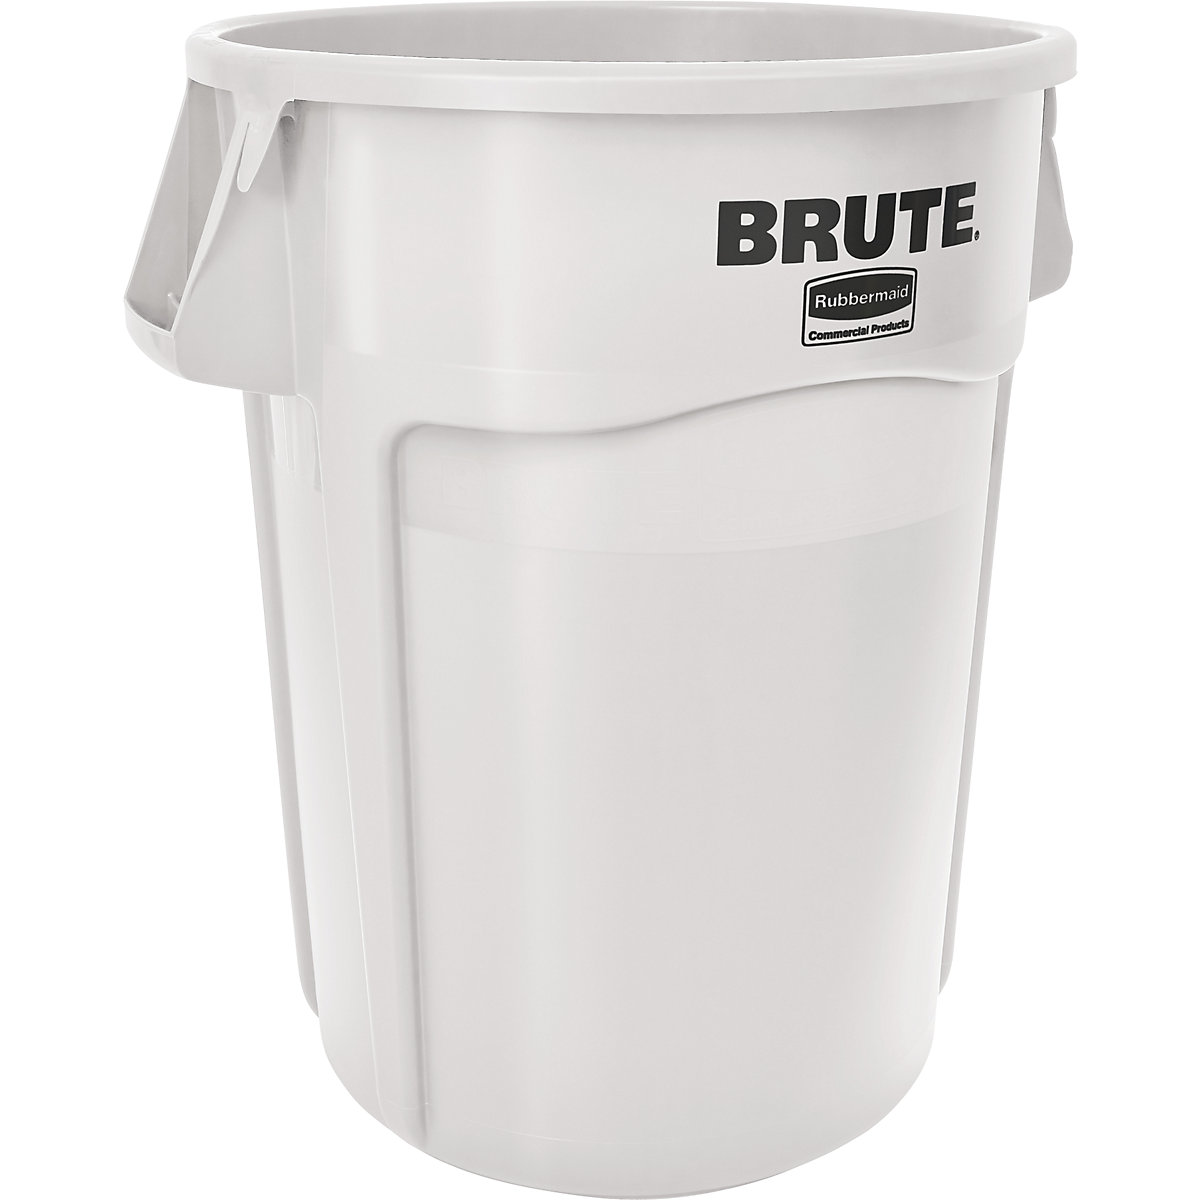 BRUTE® universal container, round - Rubbermaid